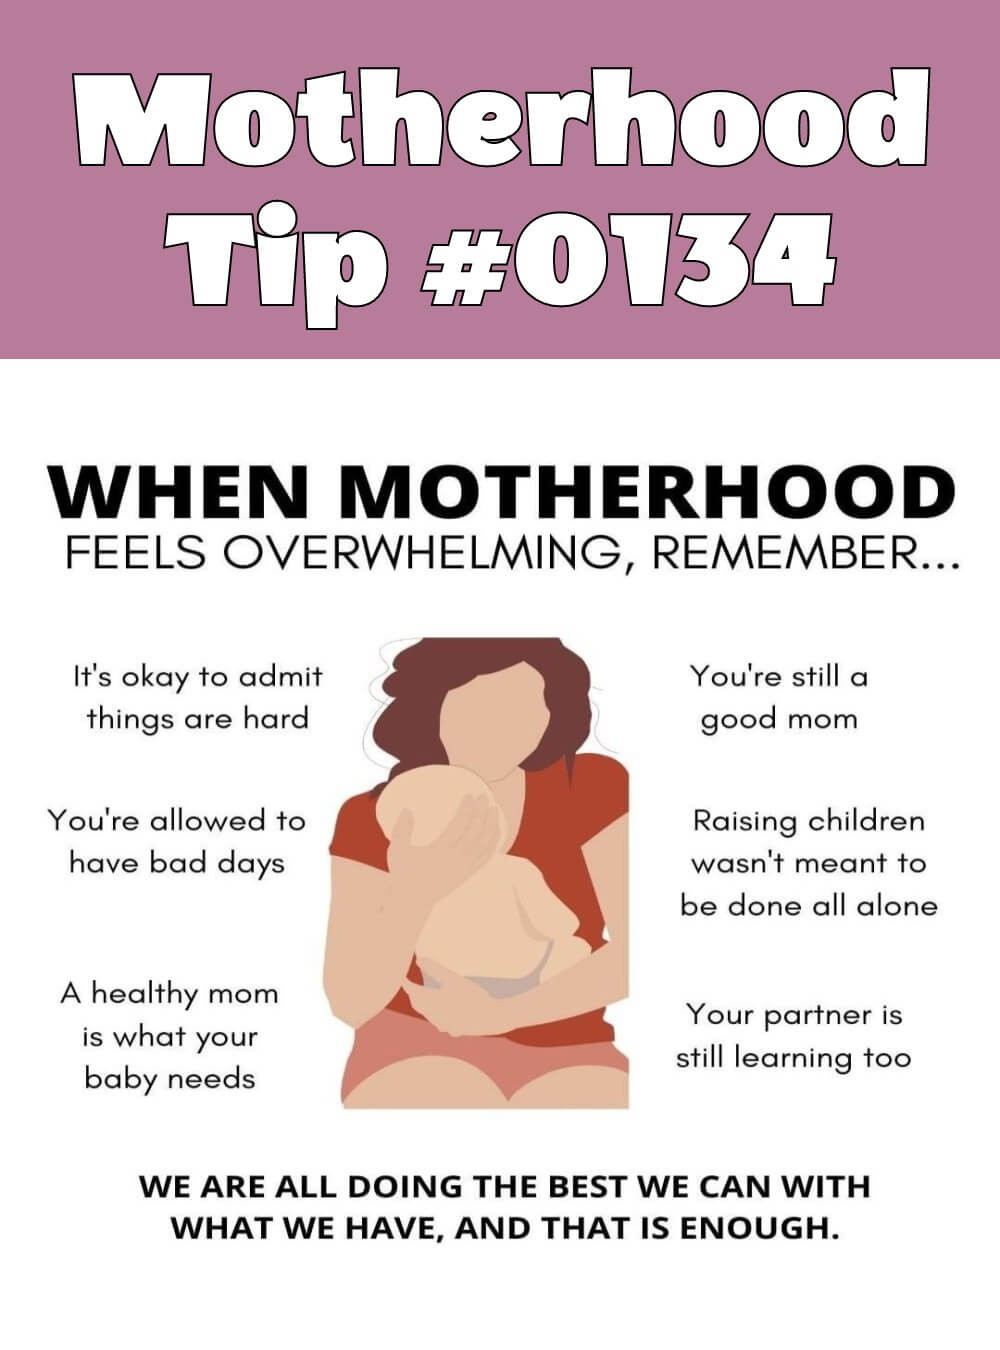 Parenting and Pregnancy Infographic | Motherhood Tip #0134